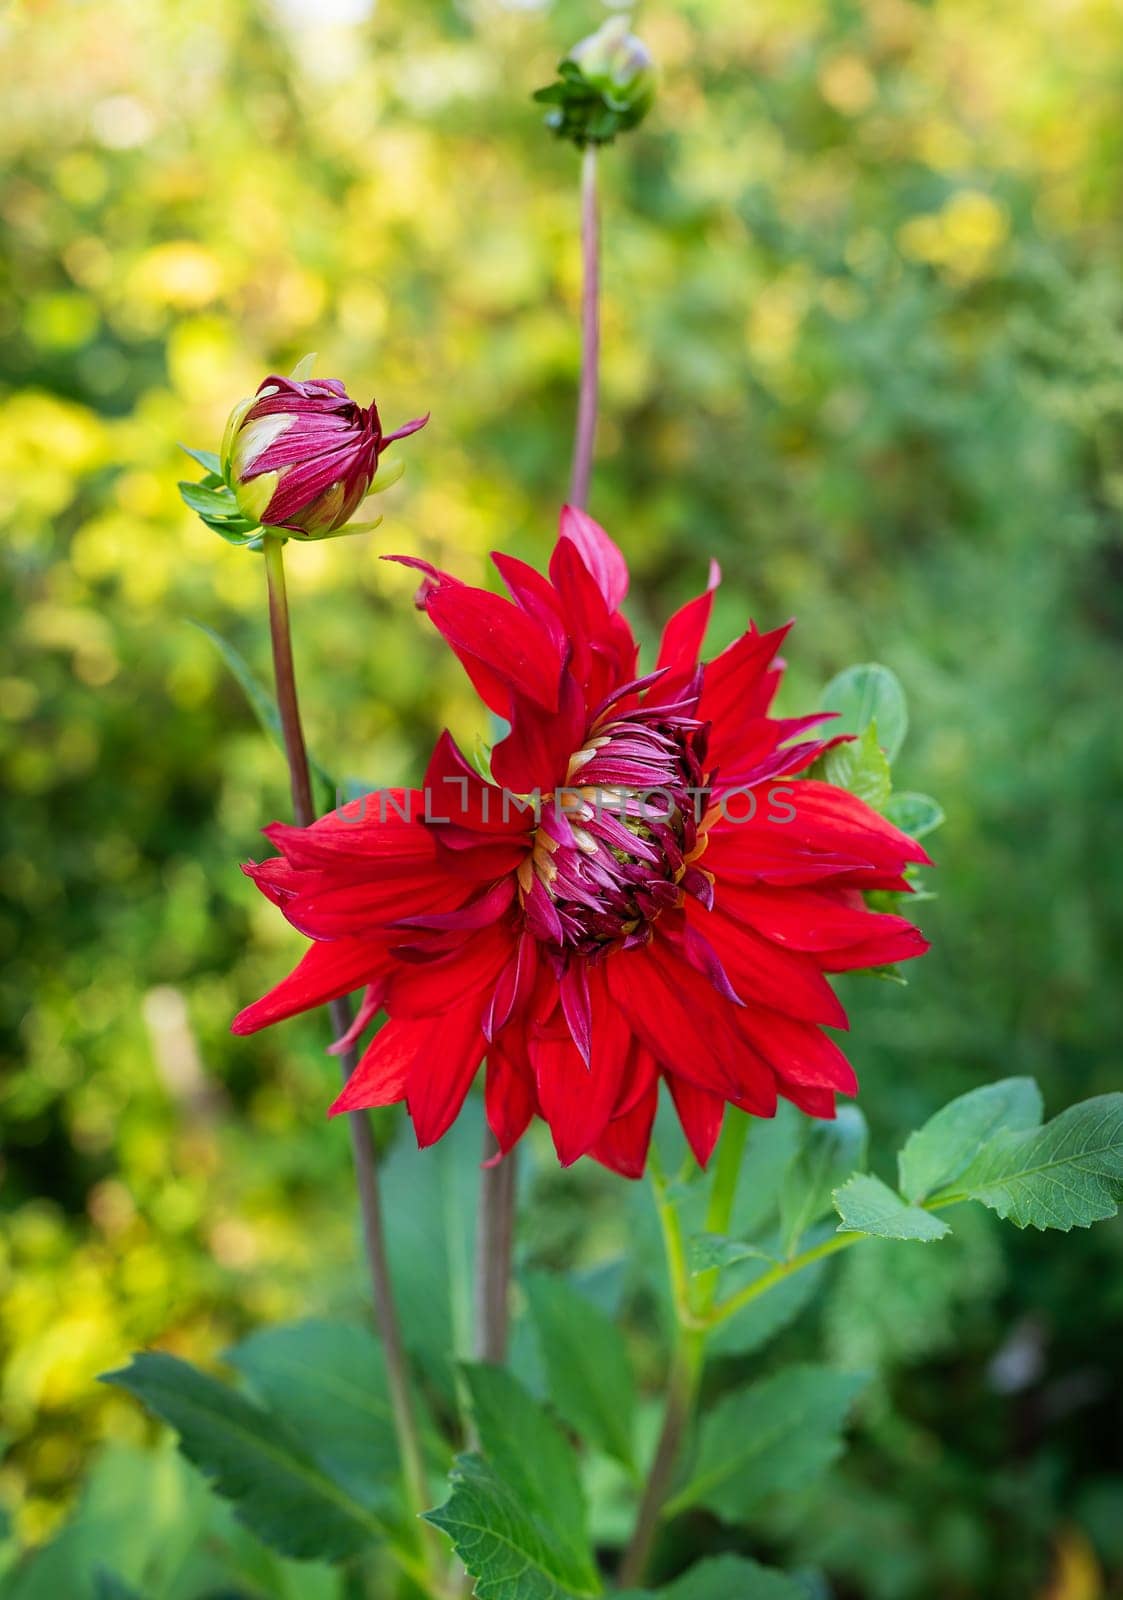 Vibrant red flower with green buds in a lush garden